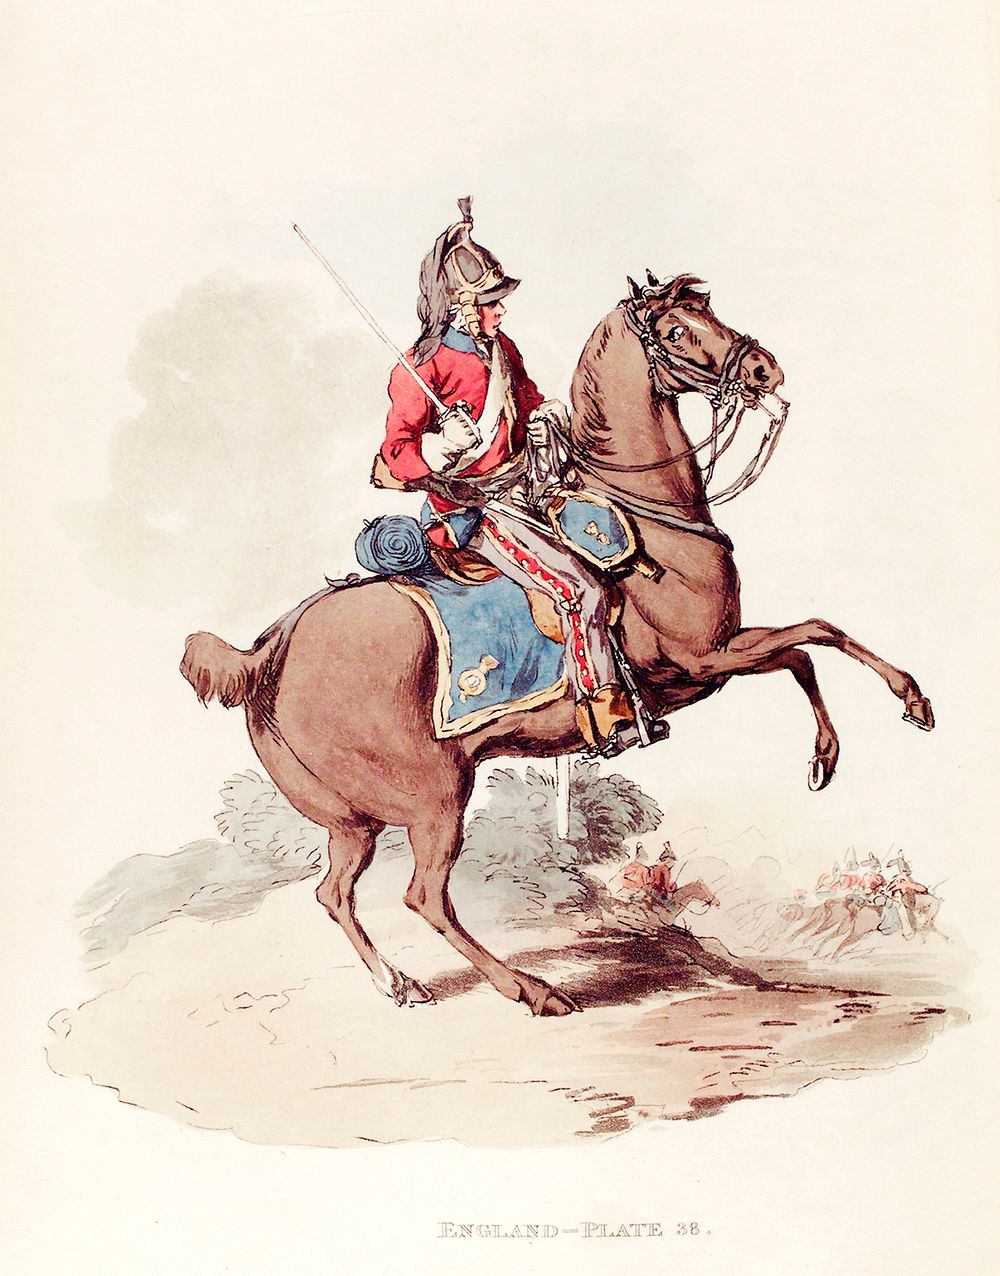 Illustration of a dragoon from Picturesque Representations of the Dress and Manners of the English(1814)by William Alexander…